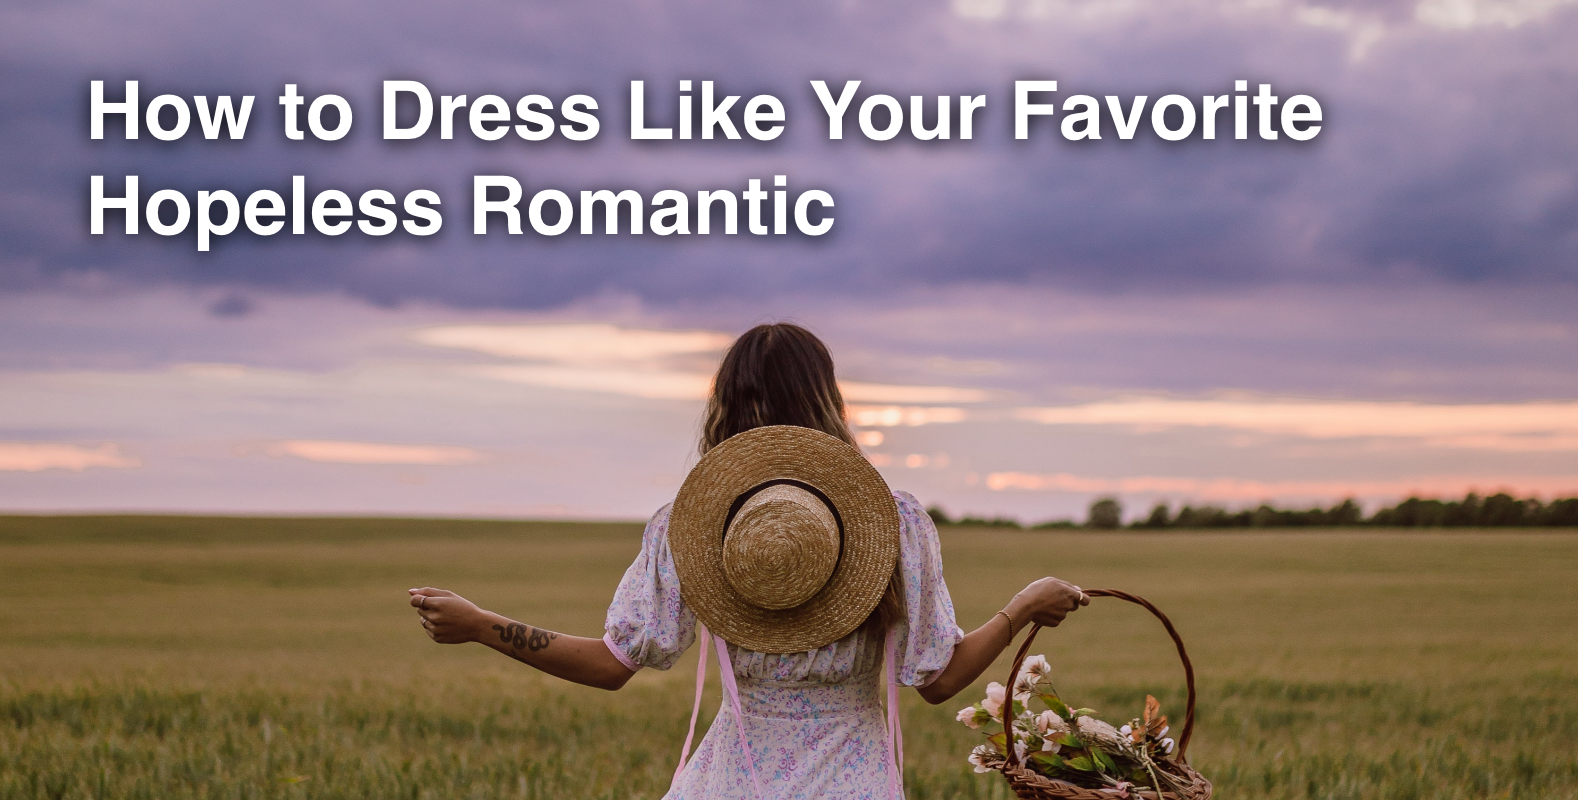 How to Dress Like Your Favorite Hopeless Romantic